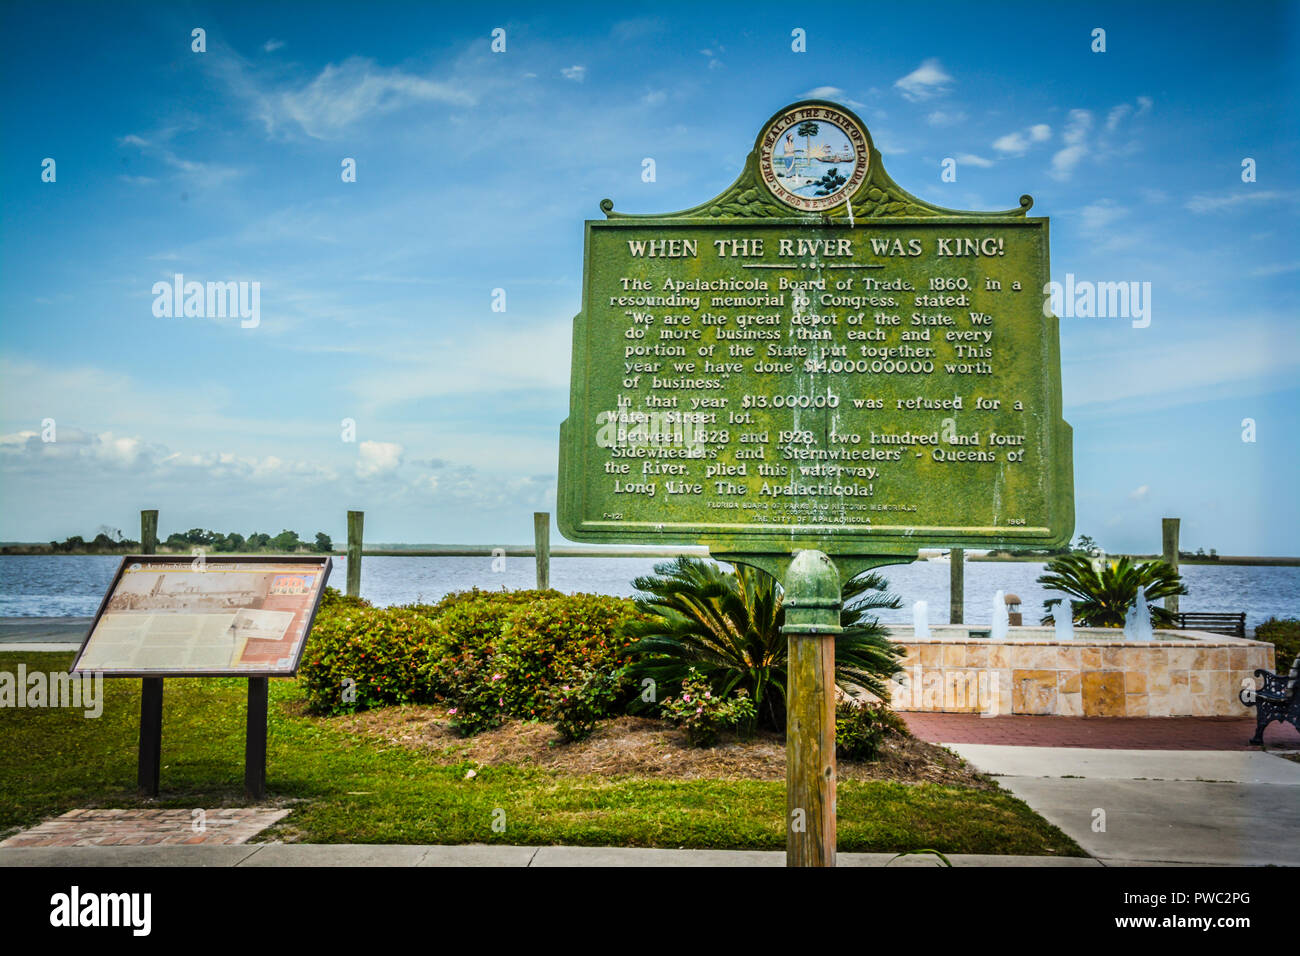 Historical plaque 'When the River was King' memorialized at the Apalachicola waterways in the Florida Panhandle Stock Photo